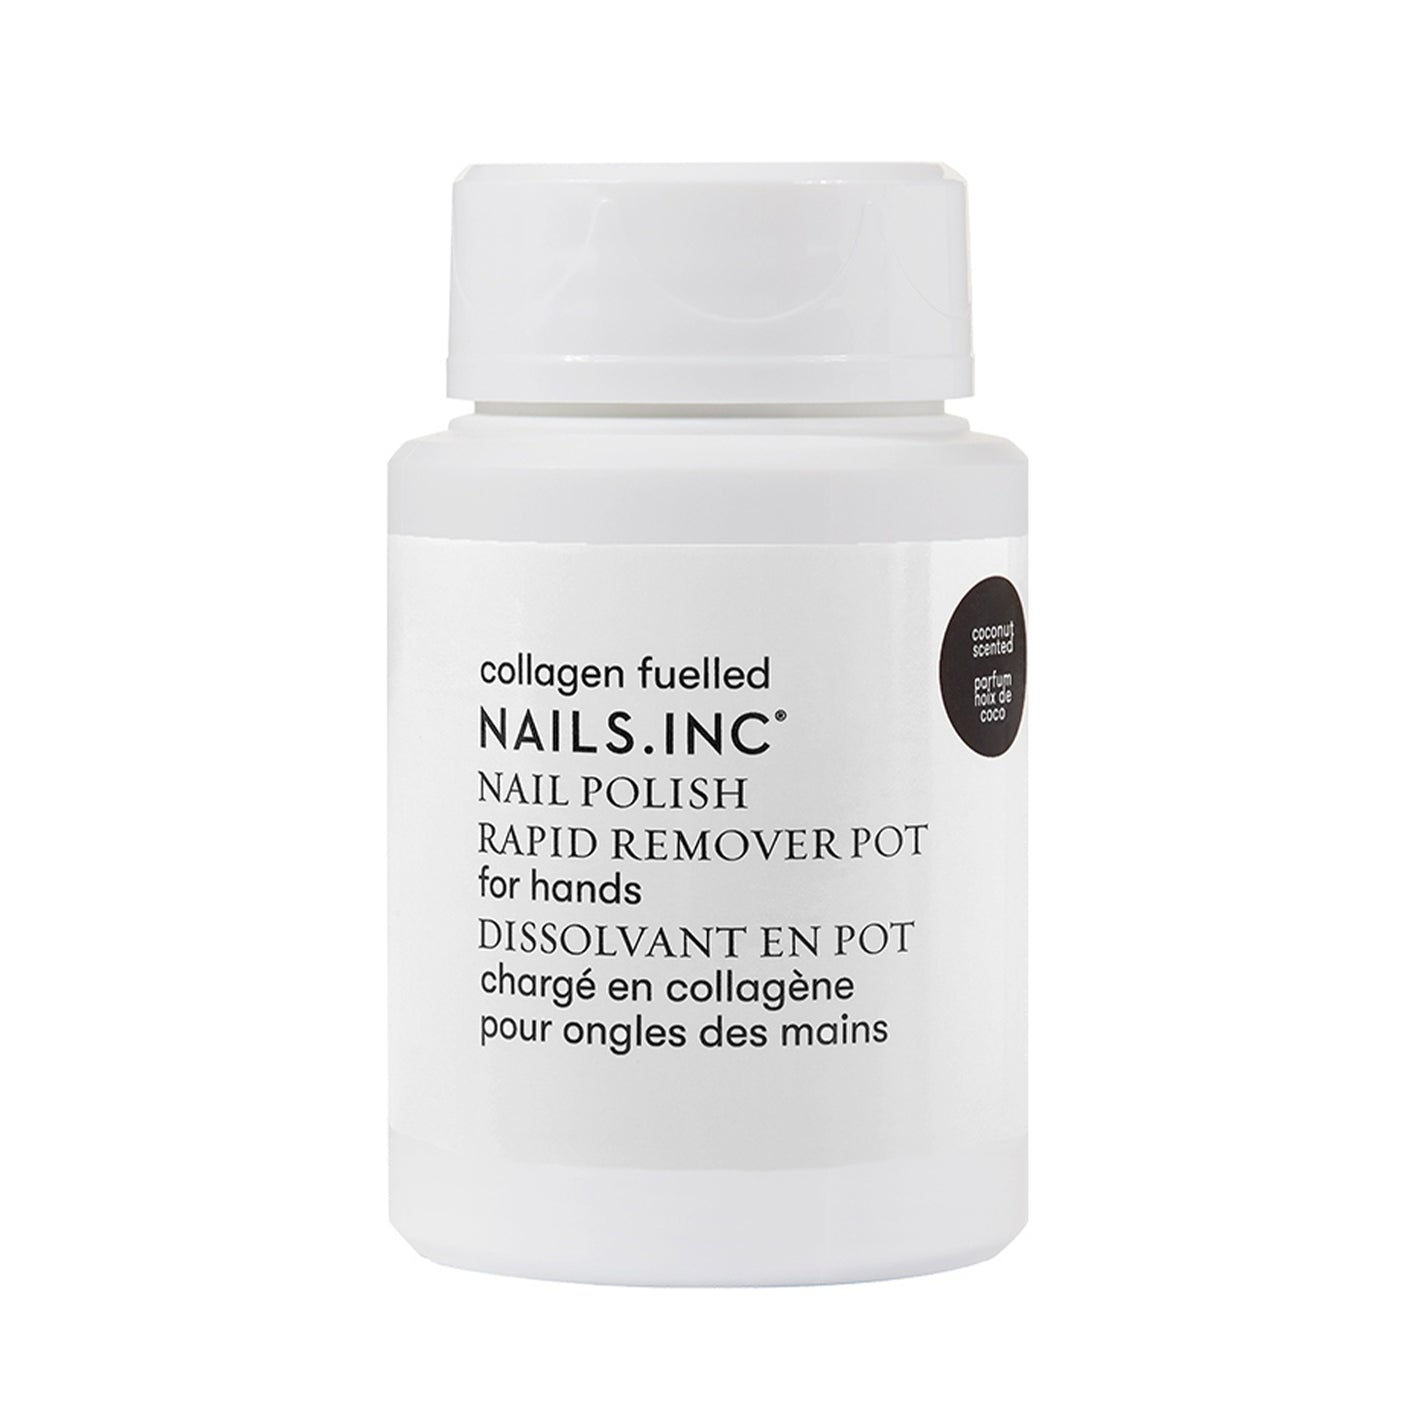 Nails.INC Nail Polish Remover Pot Powered By Collagen